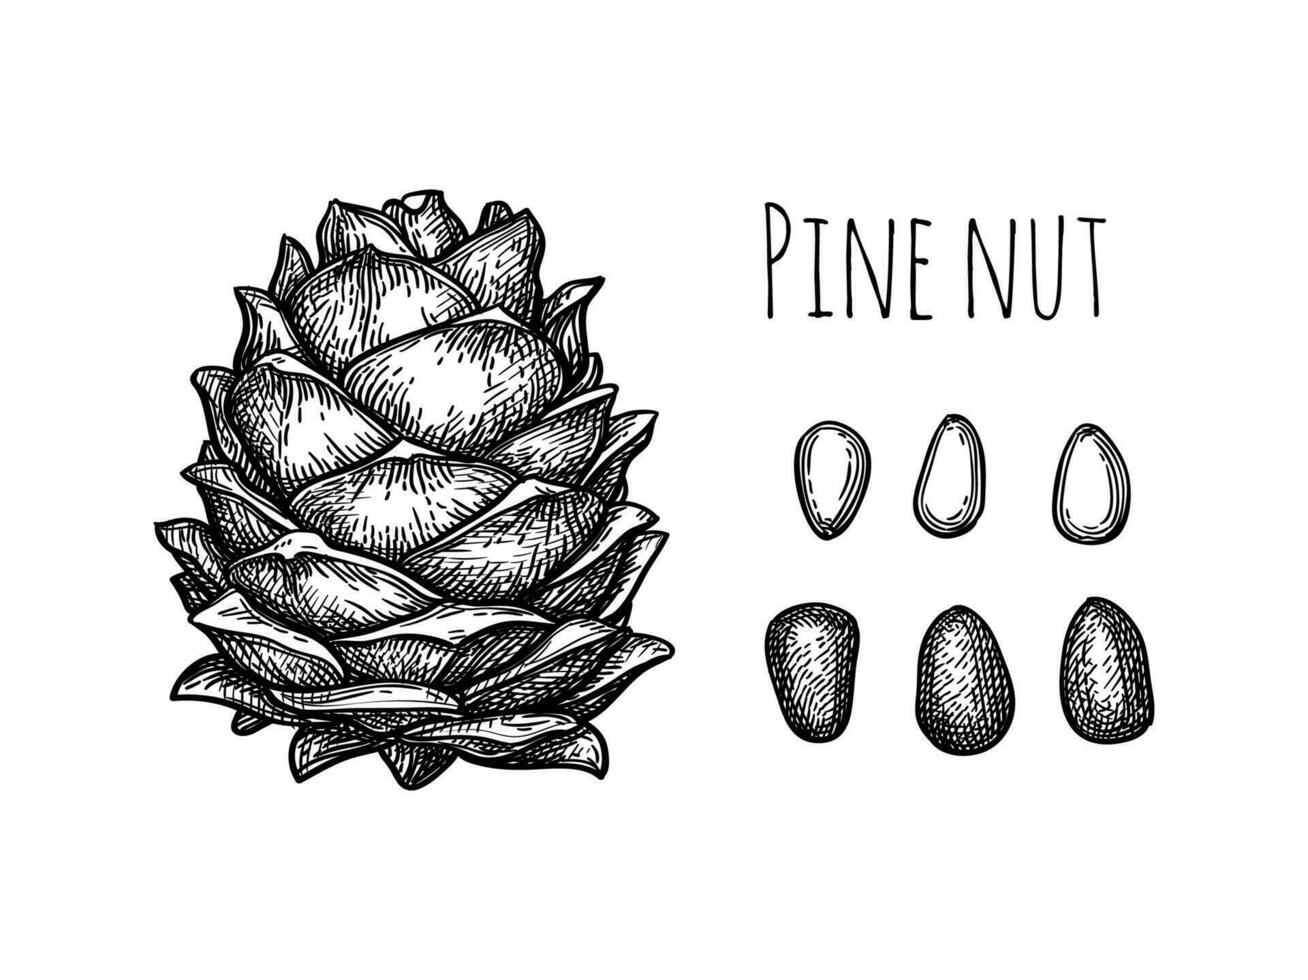 Pine nut cone and nuts. Hand drawn ink sketch. vector